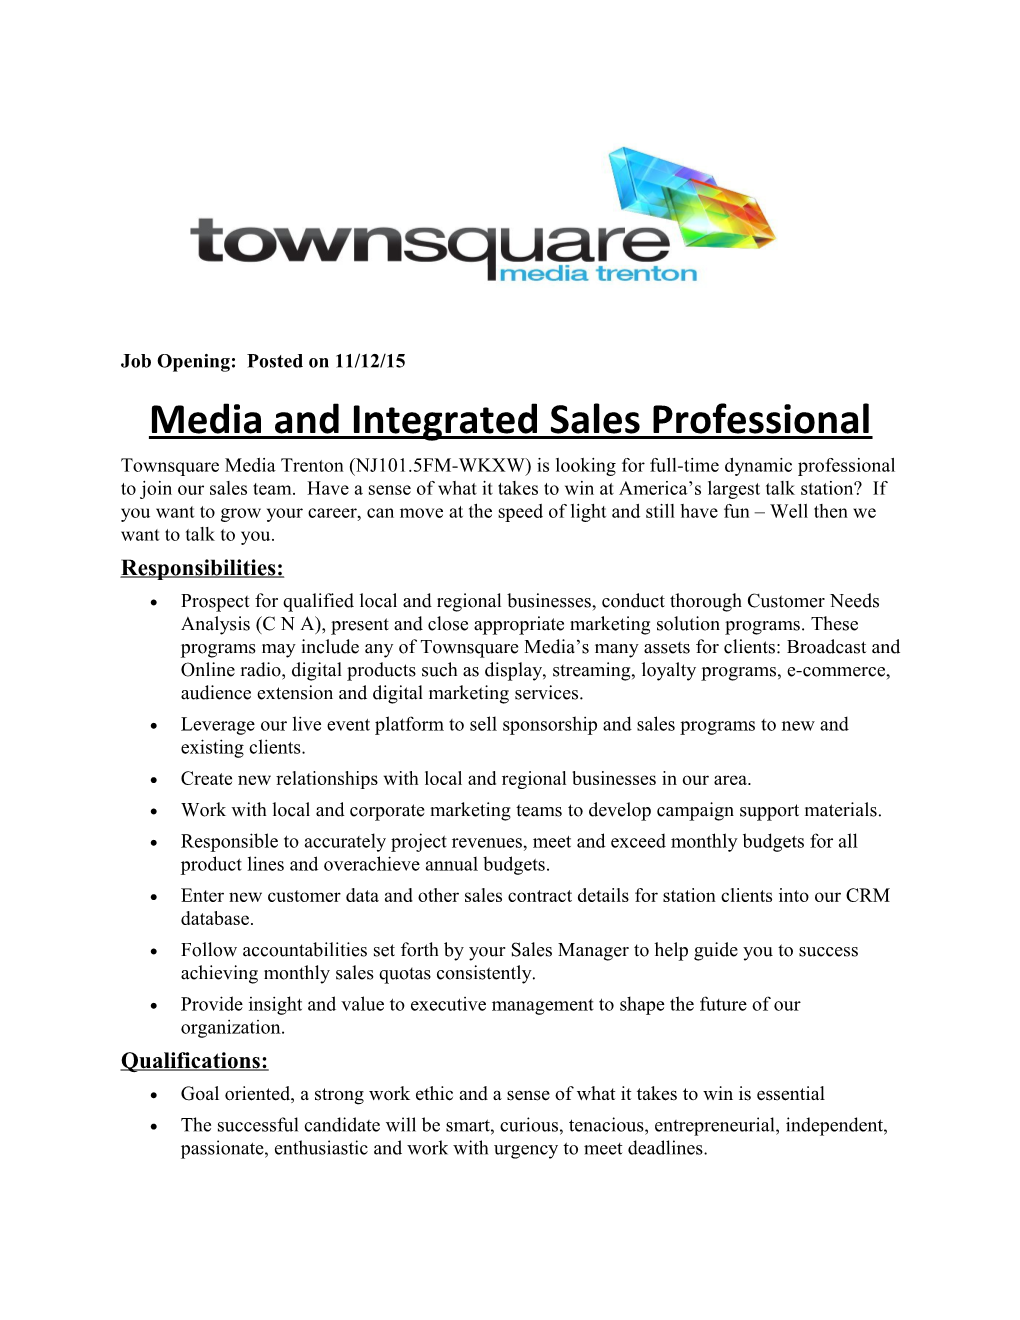 Media and Integrated Sales Professional